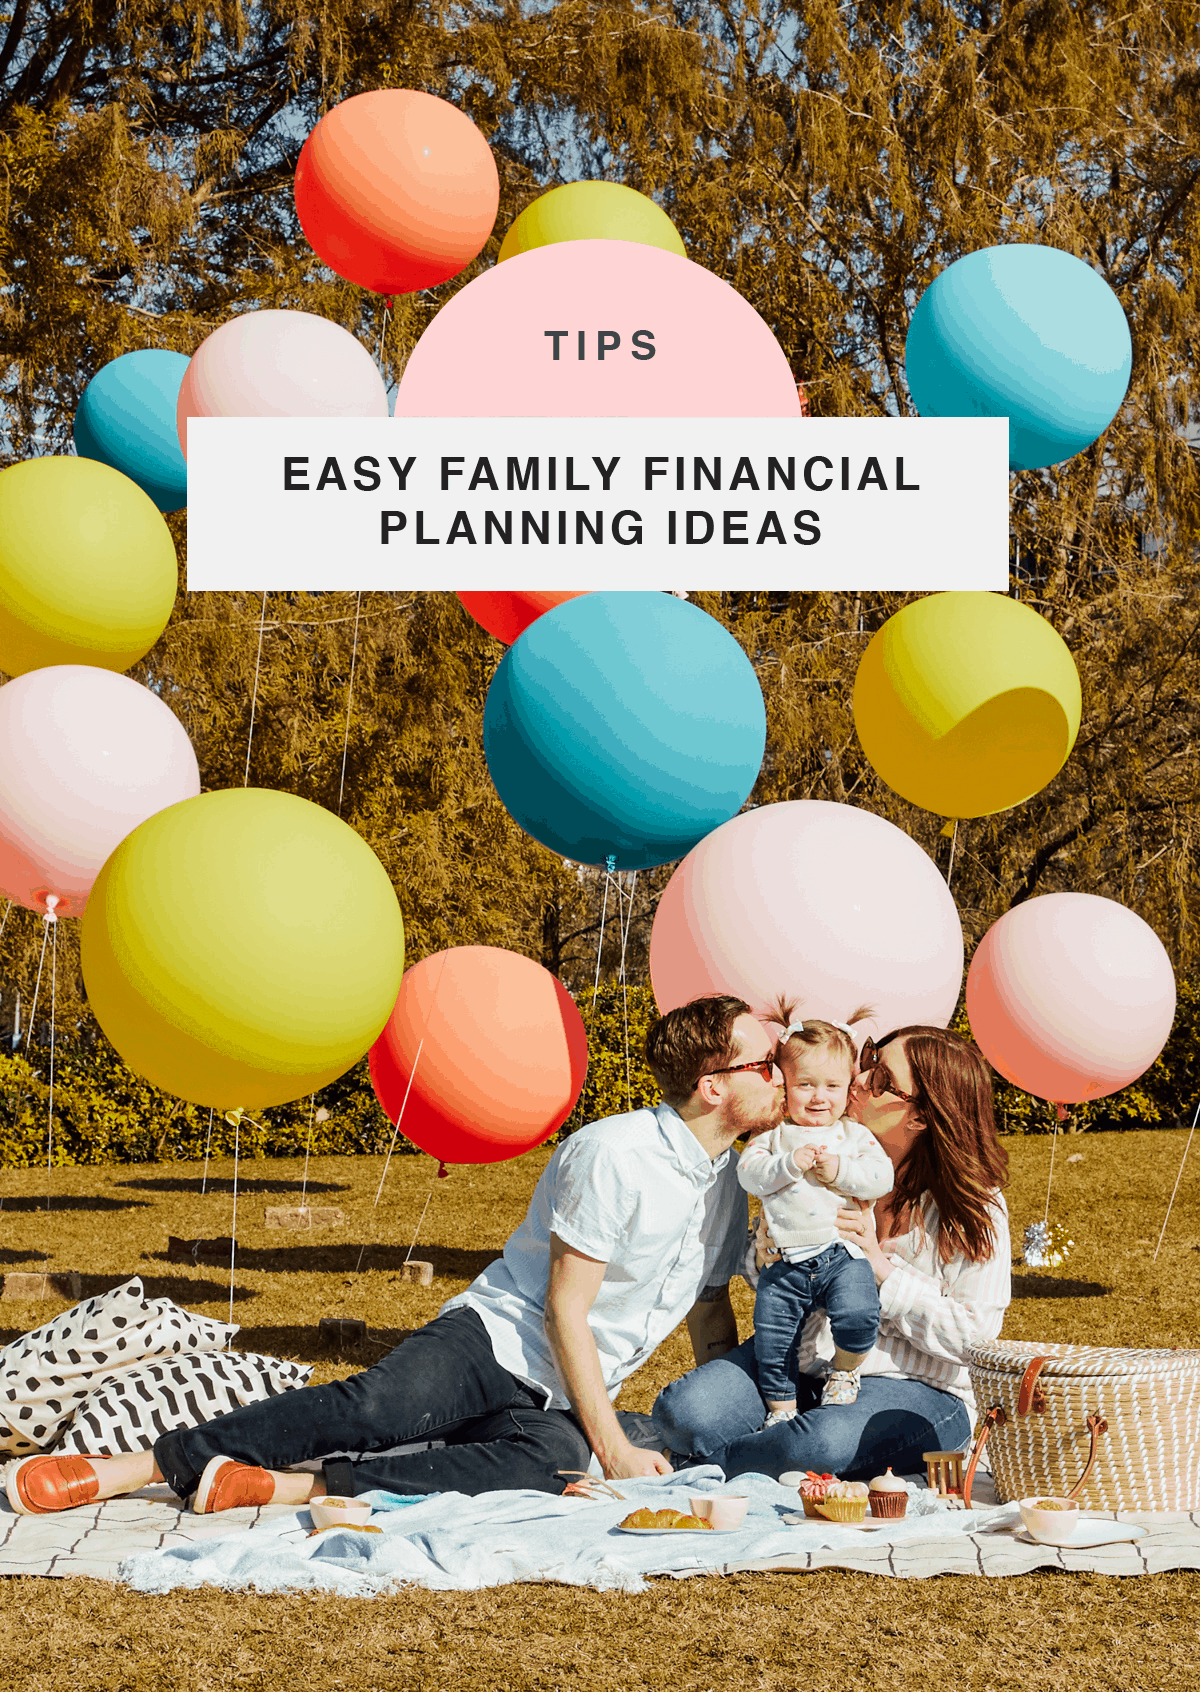 Sharing all of our tips! Things I Didn't Know About Basic Financial Planning + Insurance Until Having A Family by top Houston lifestyle blogger Ashley Rose of Sugar & Cloth - #family #budget #budgeting #tips #planning #finances #financial #insurance #help #guide 